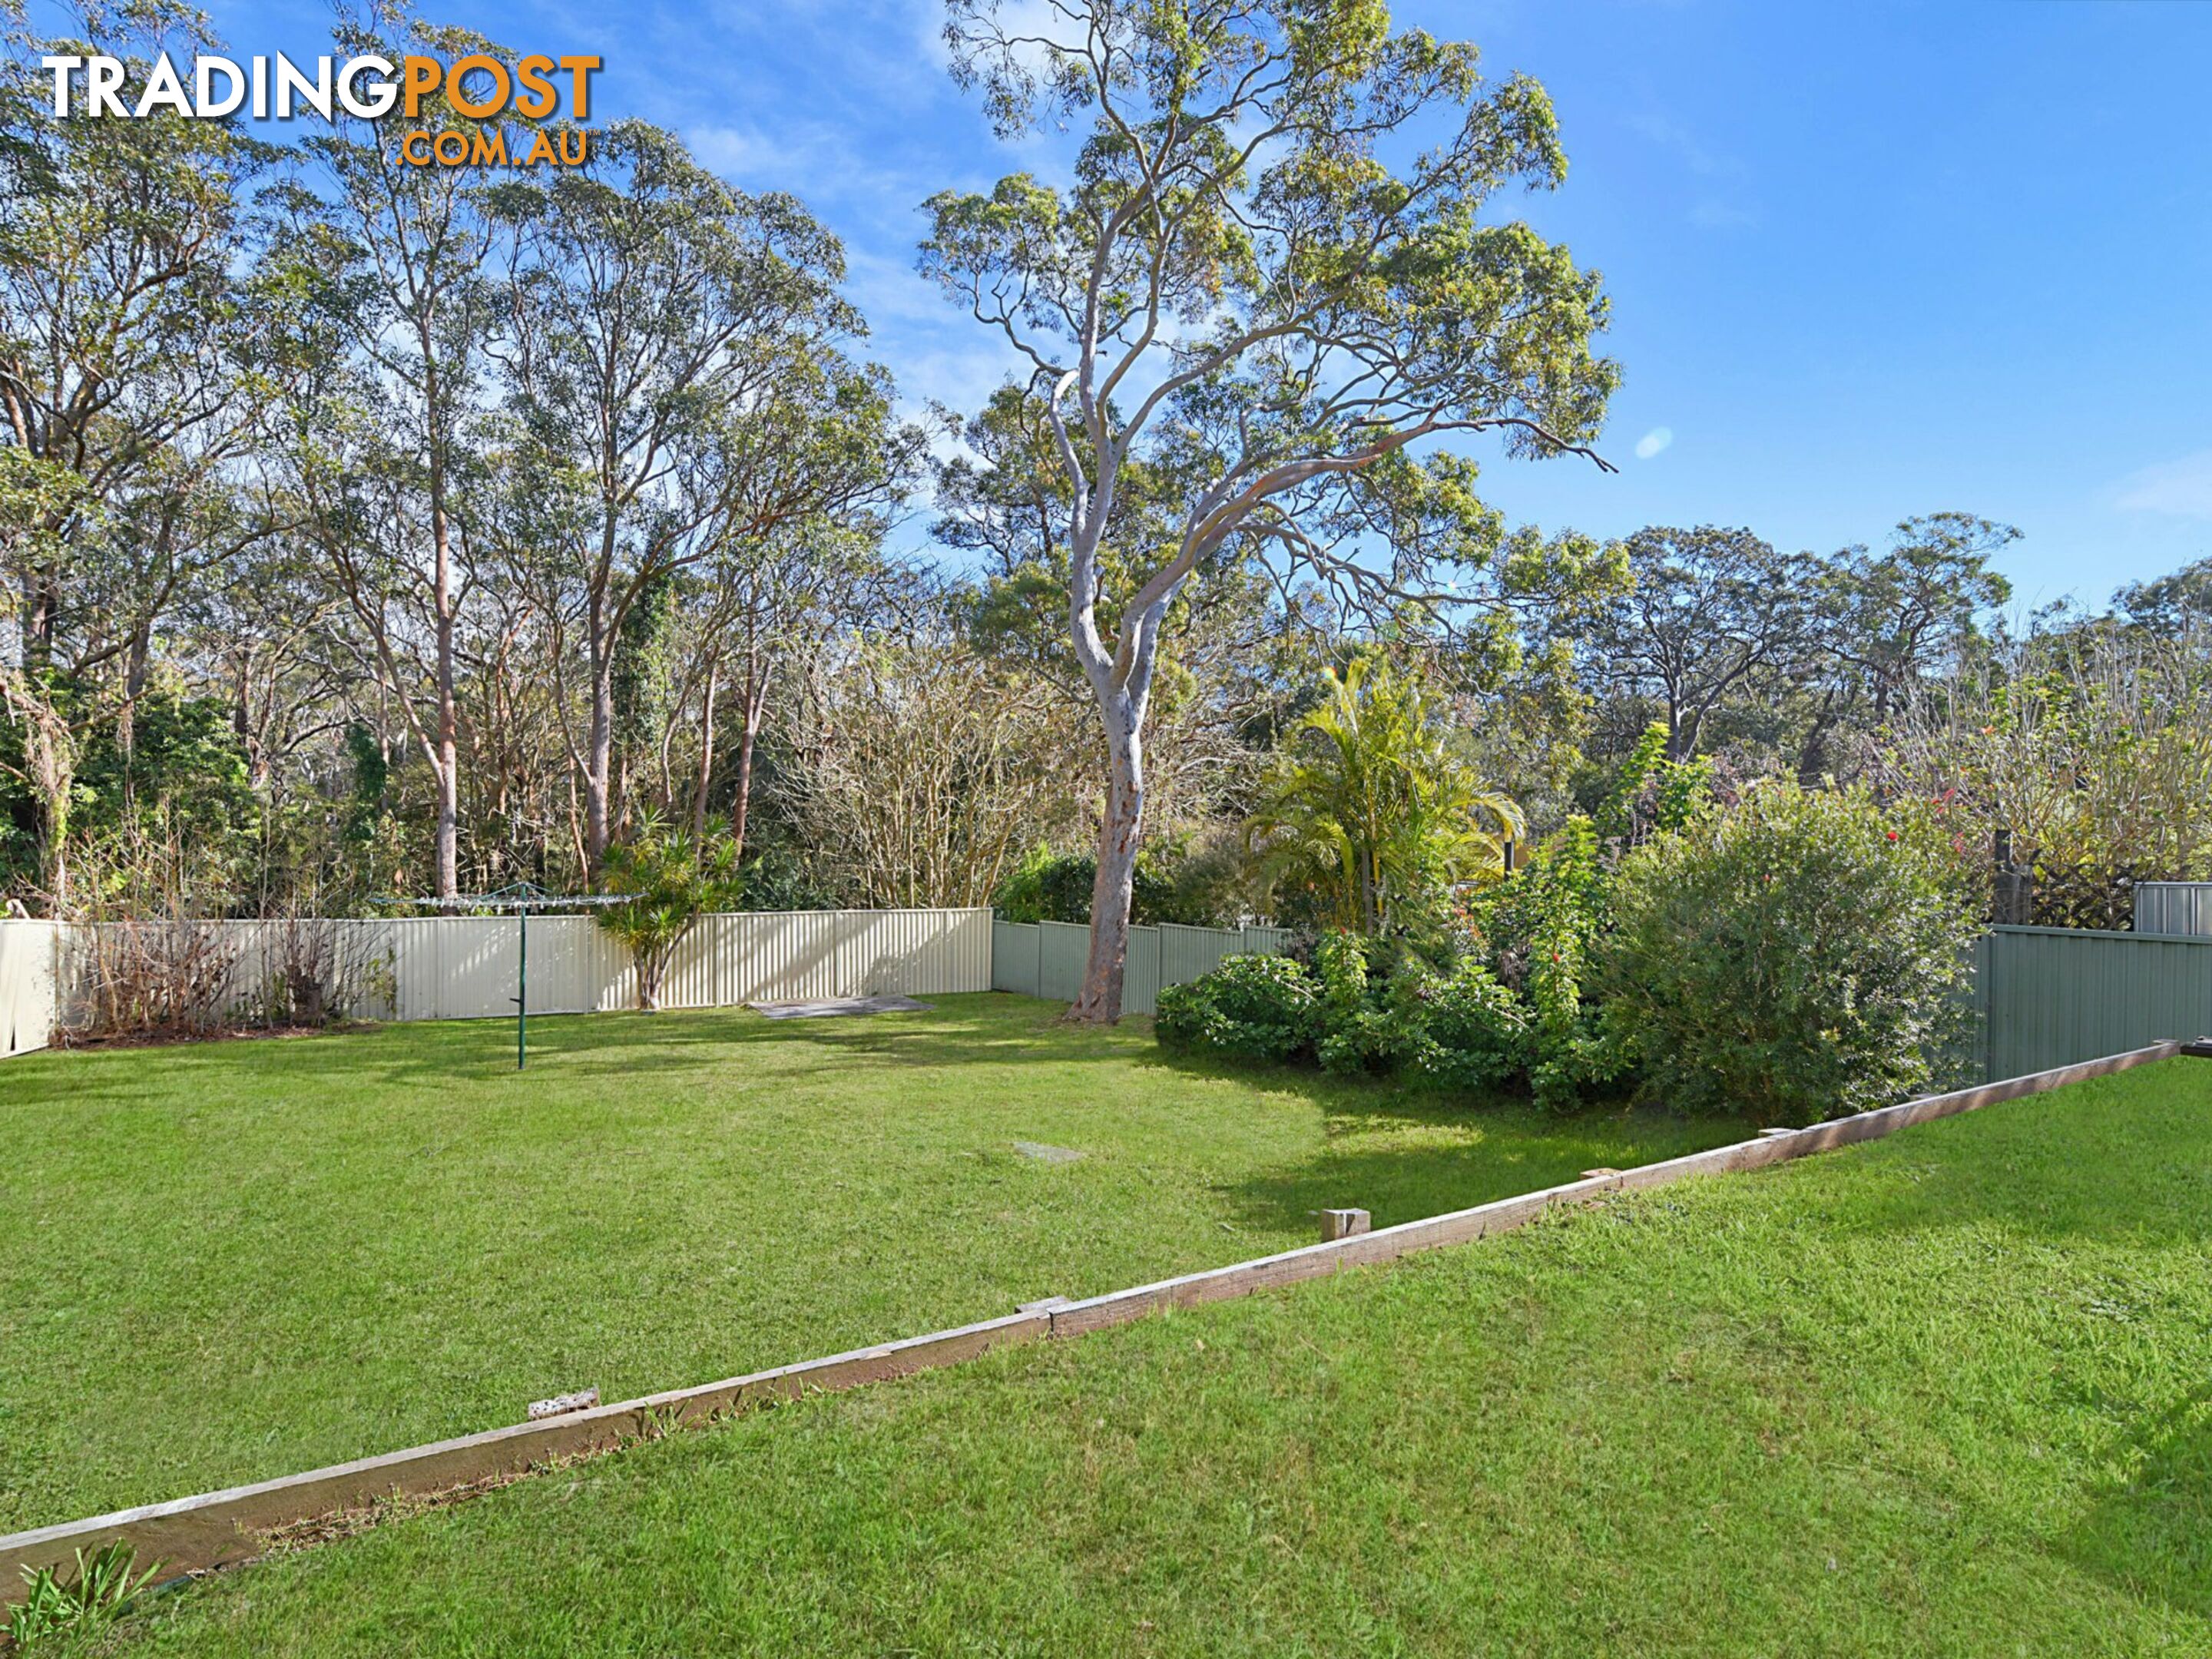 138A Dudley Street LAKE HAVEN NSW 2263